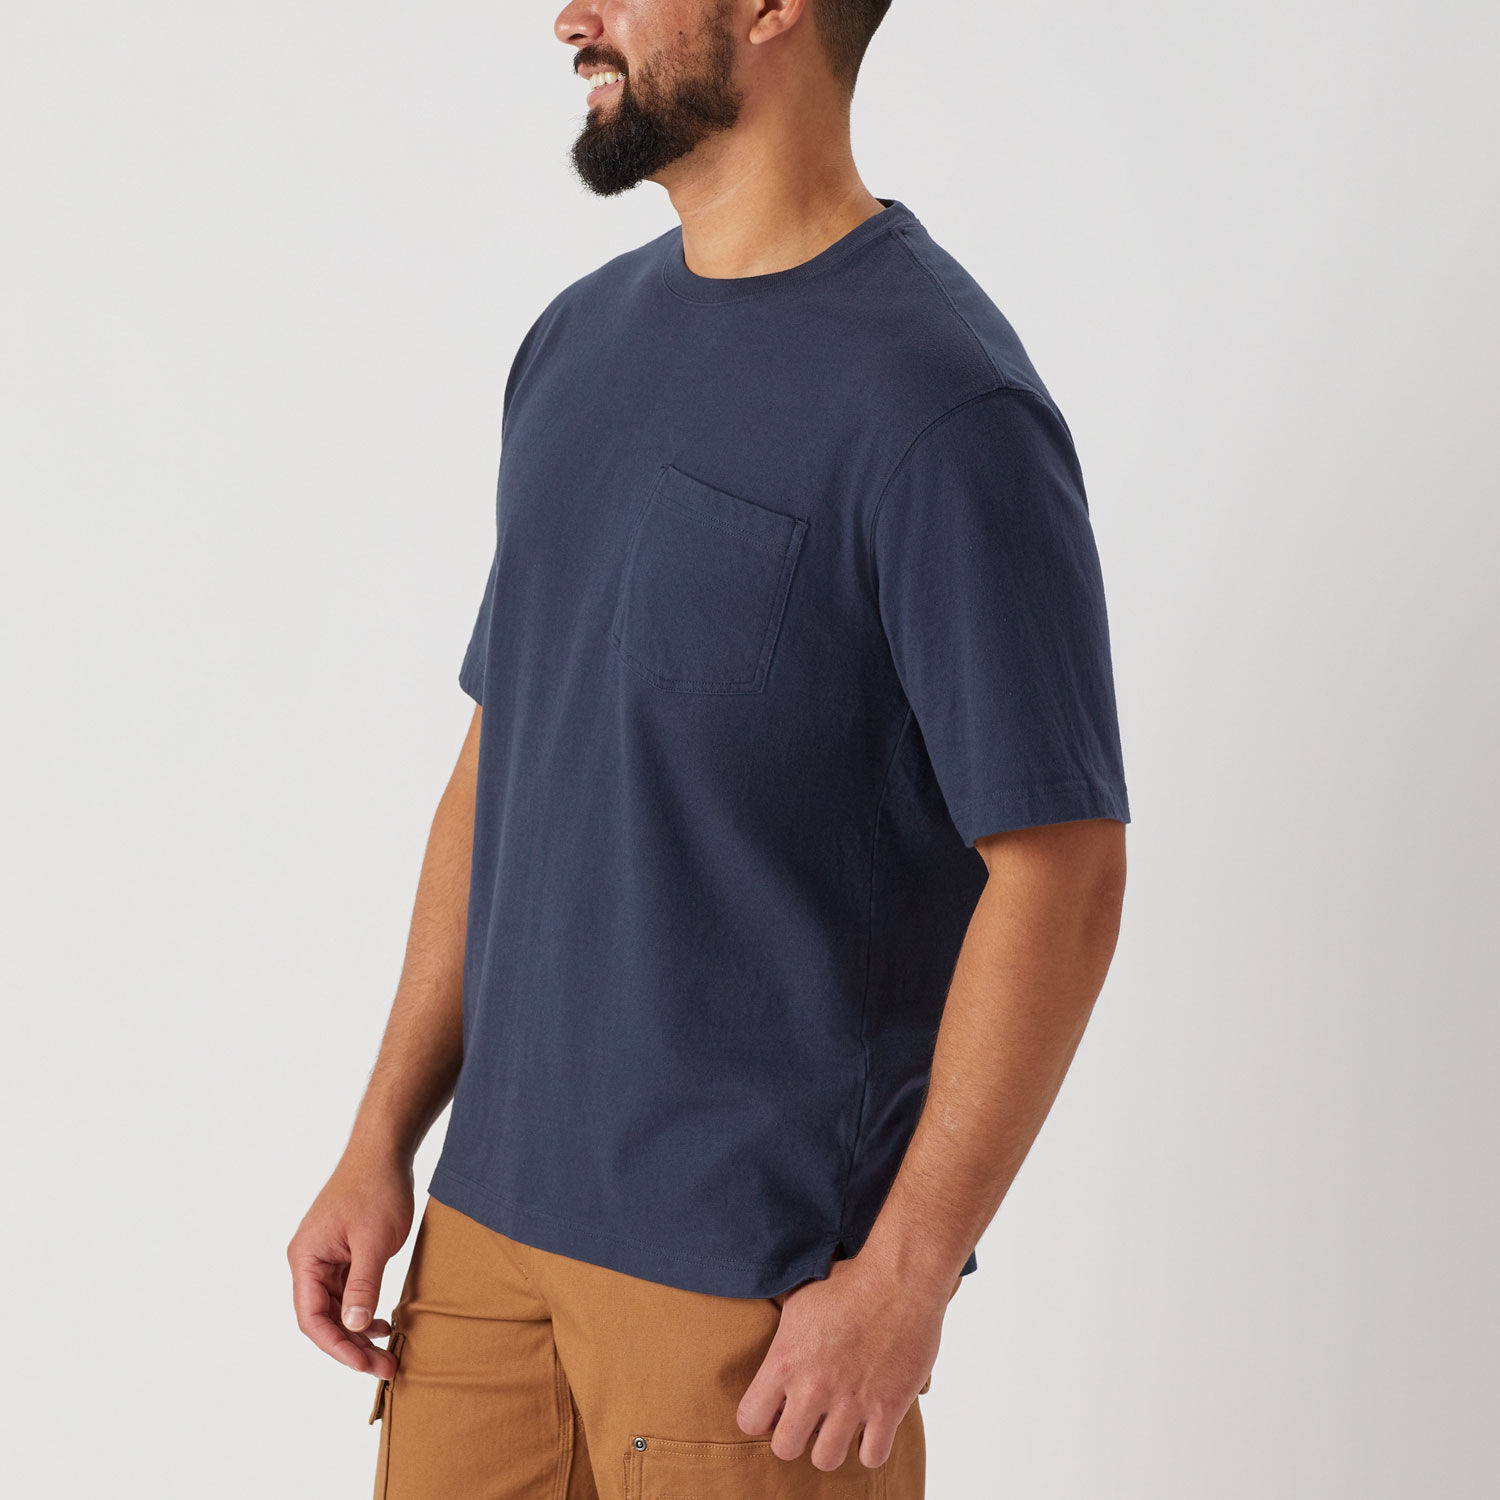 Men's Un-Longtail T Relaxed Fit Short Sleeve Shirt with Pocket